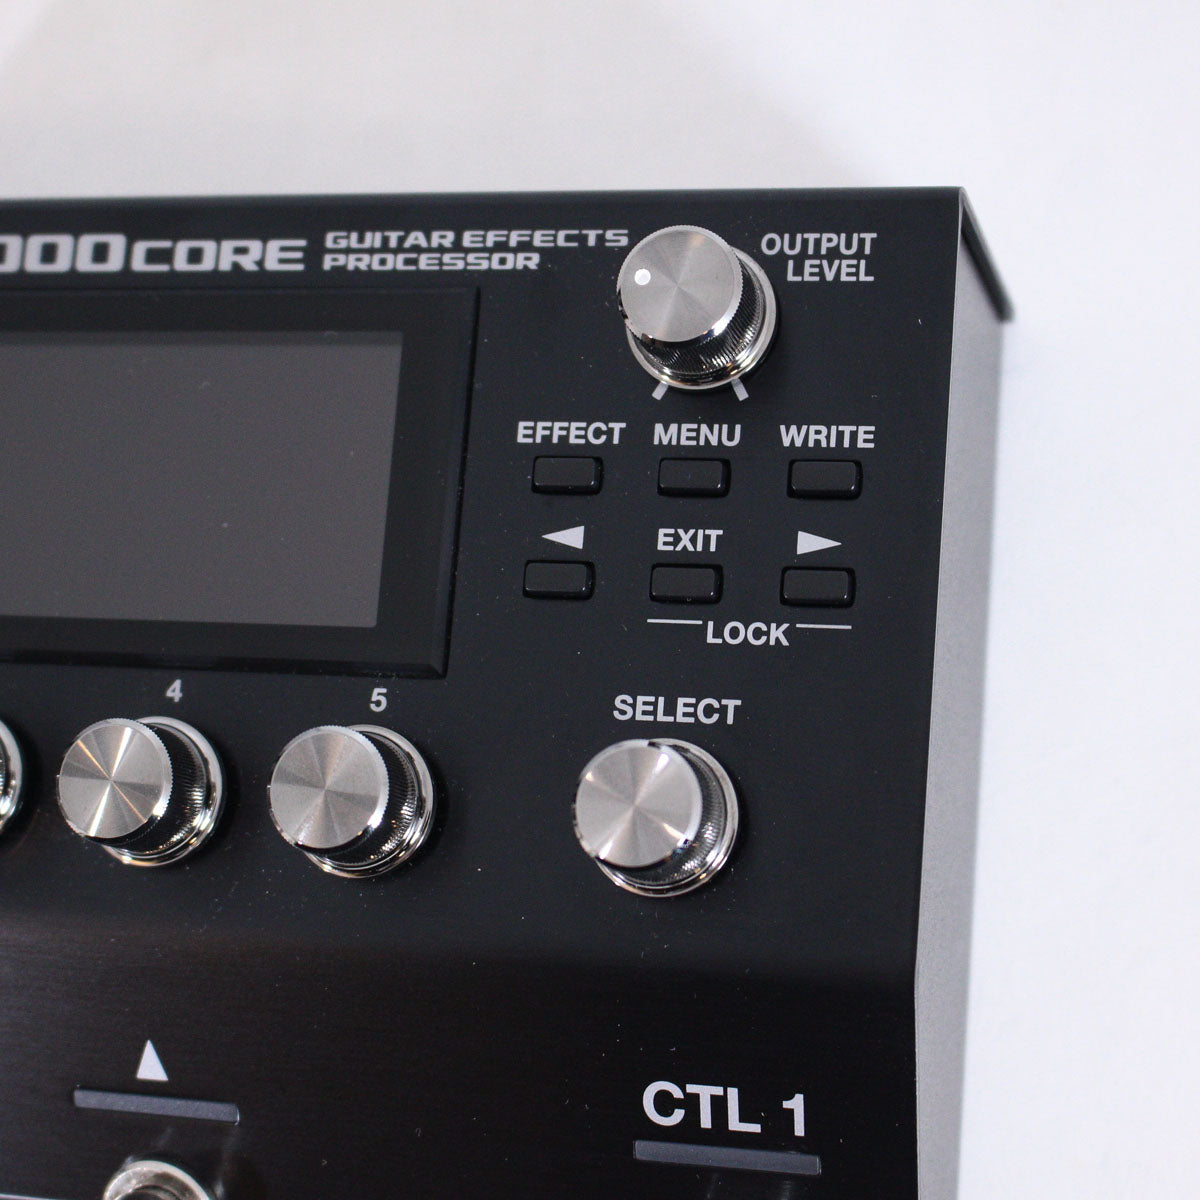 [SN A1Q7049] USED BOSS / GT-1000CORE / Guitar Effects Processor [05]